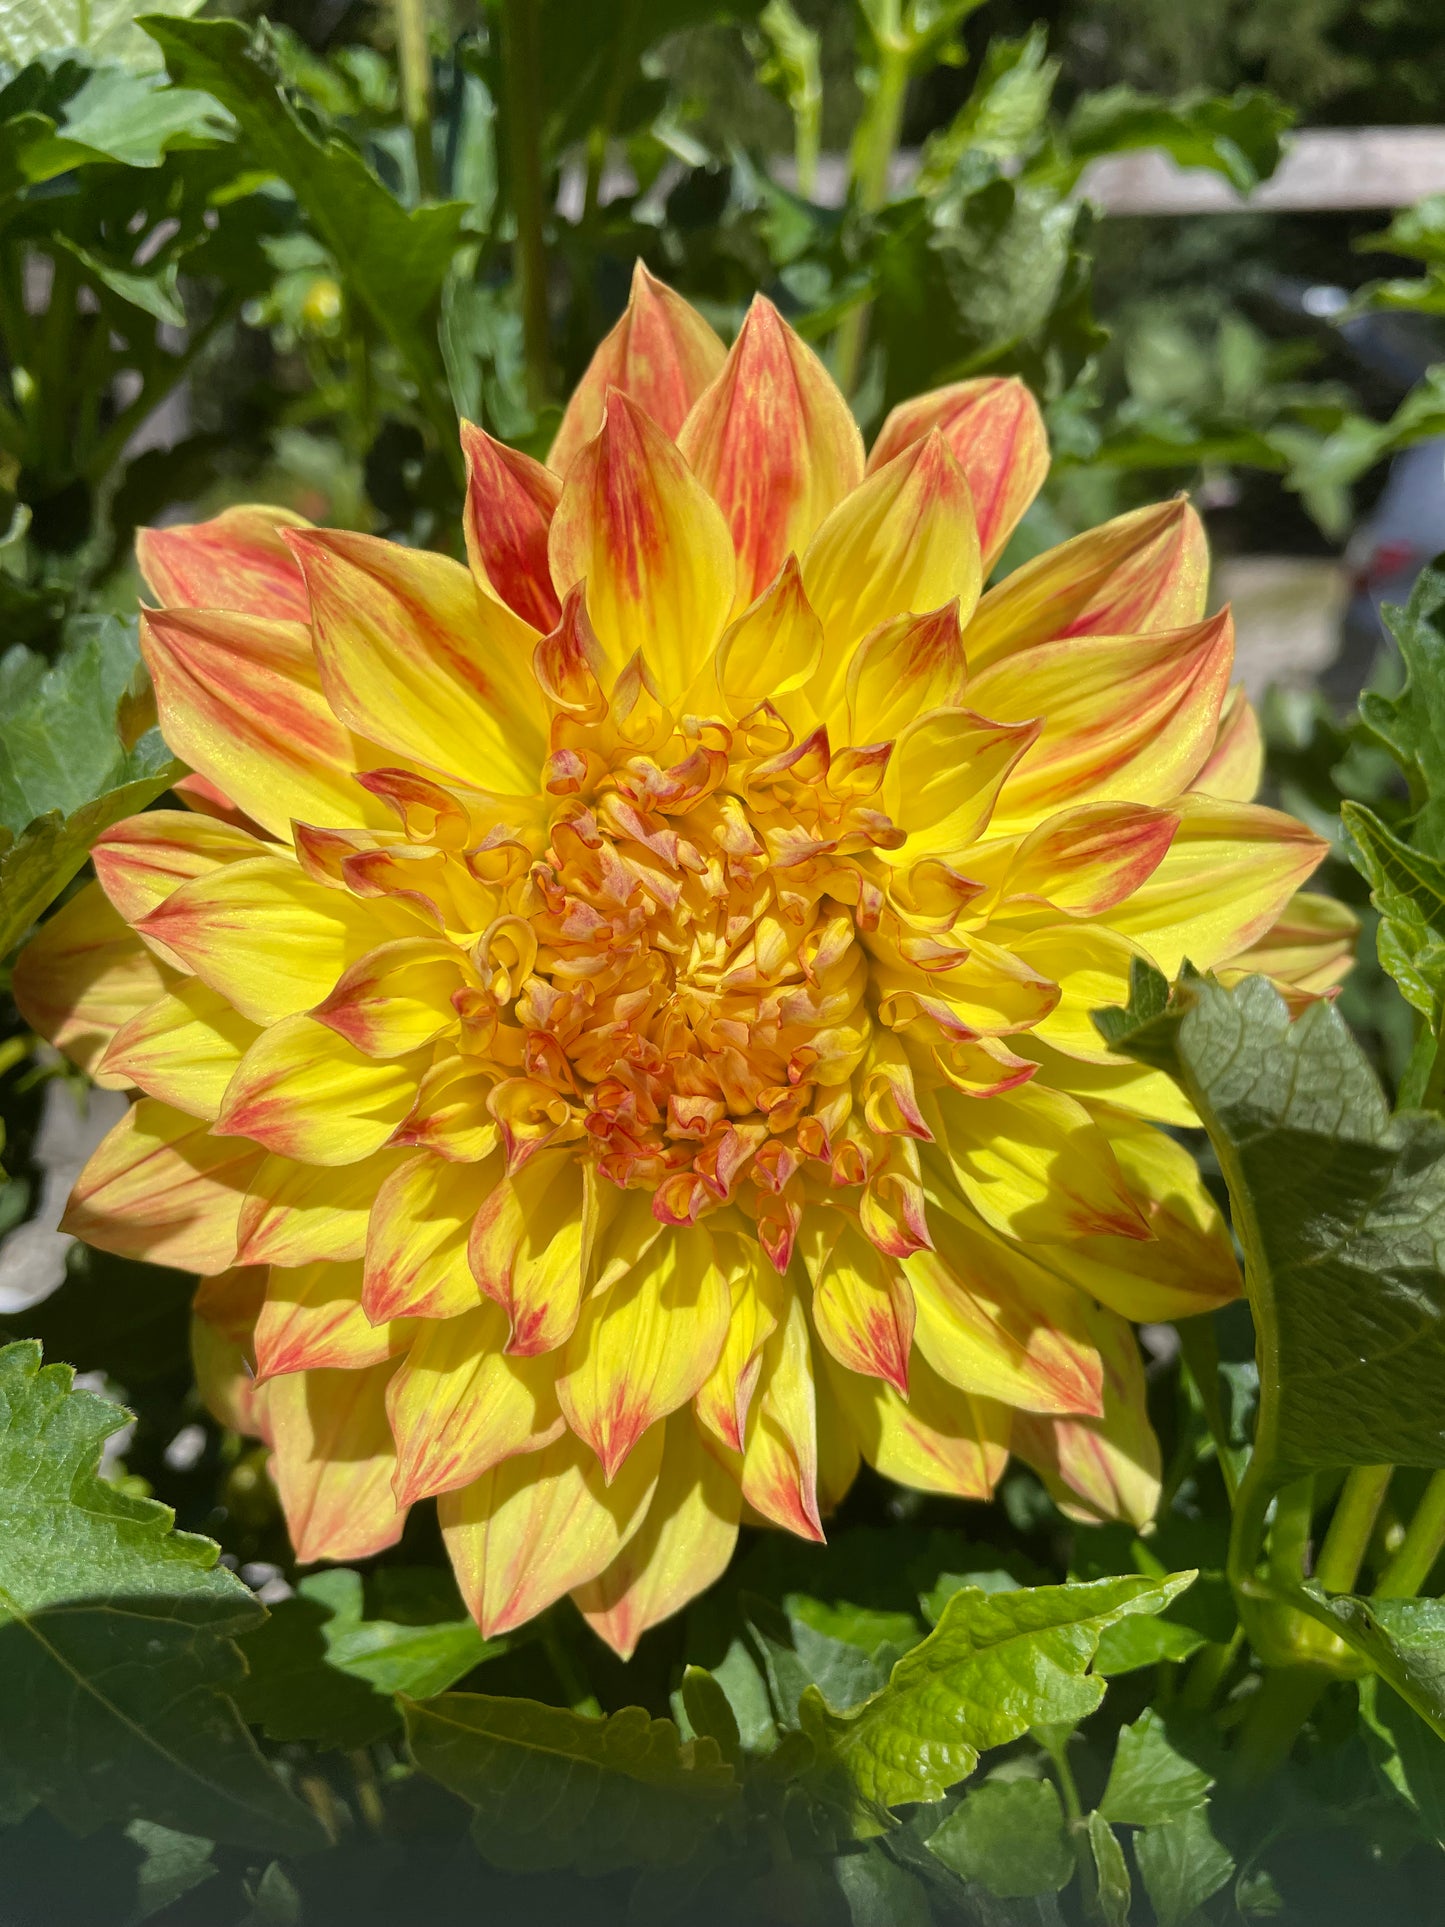 Dinnerplate dahlia "El Sol" in full bloom.  Bright orange and yellow with informal petals.